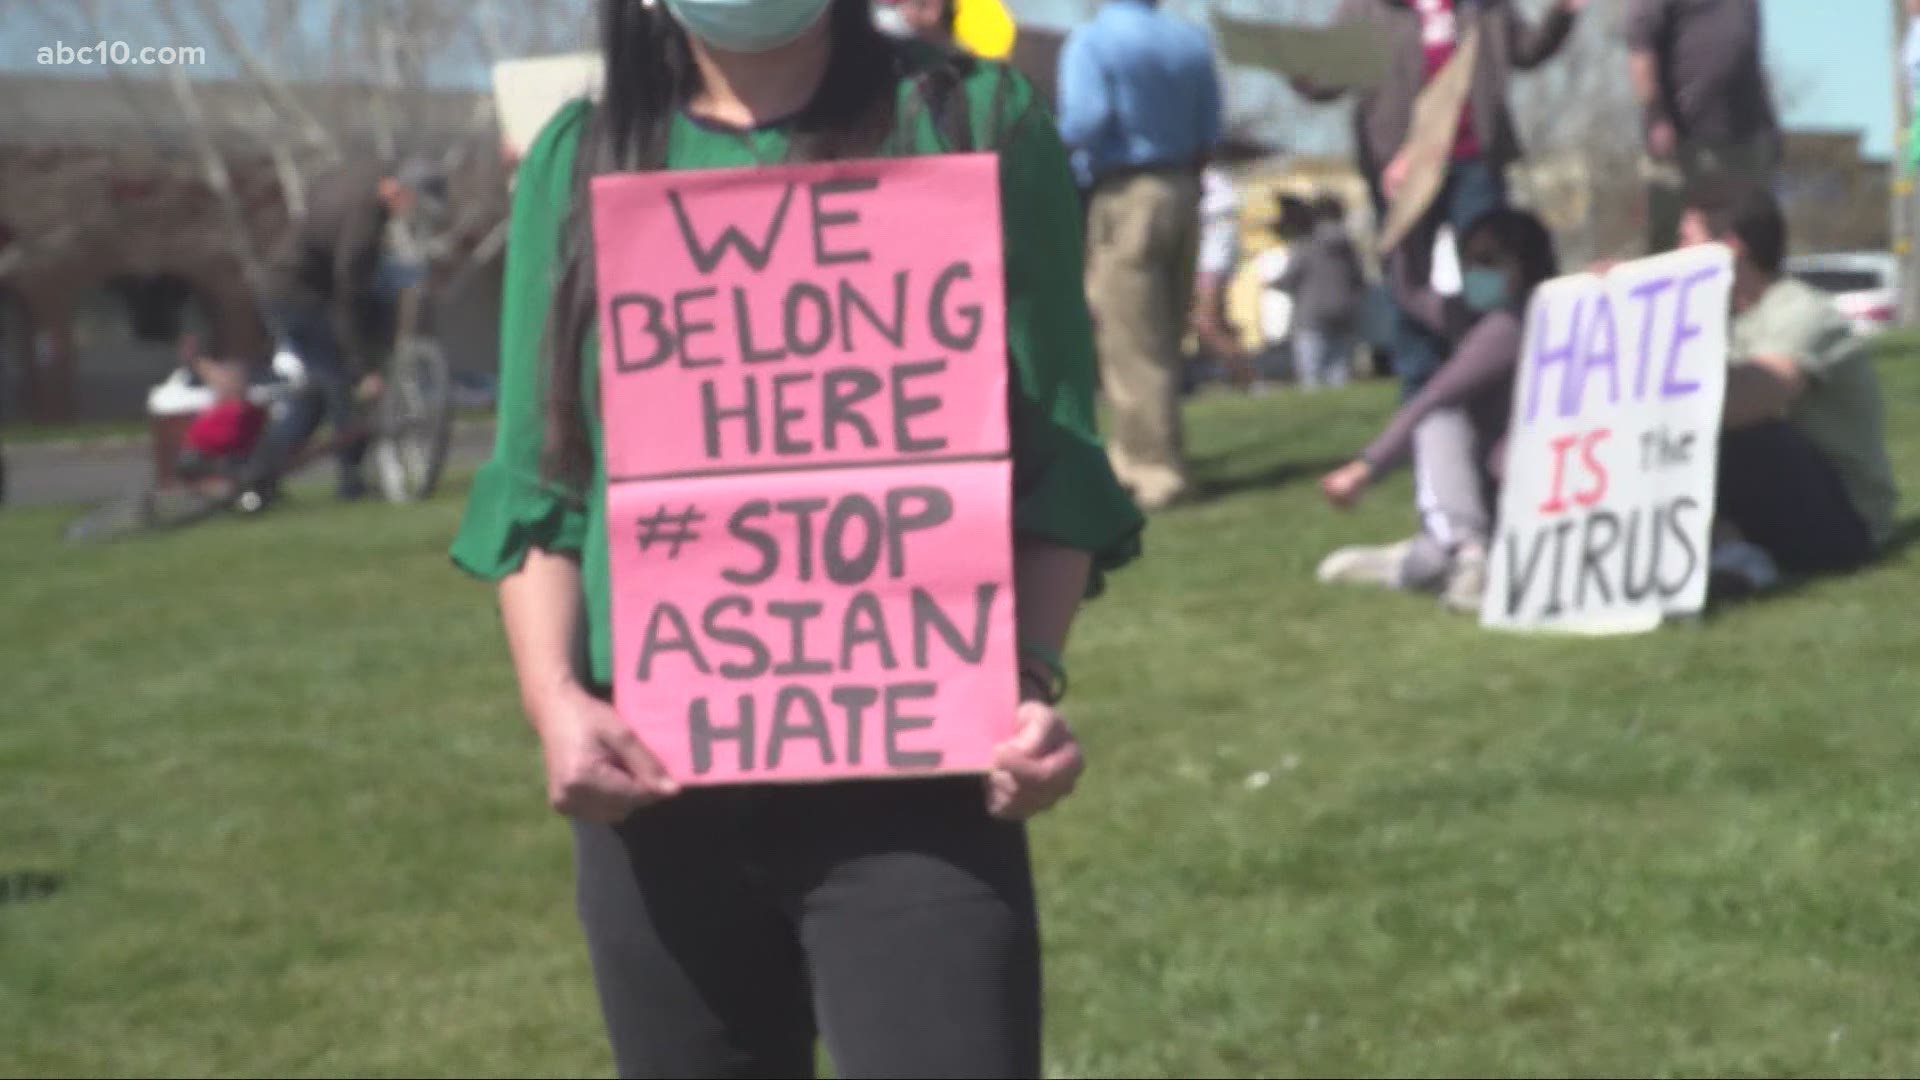 An Elk Grove rally gathered more than 100 people with a clear message to stop Asian hate.